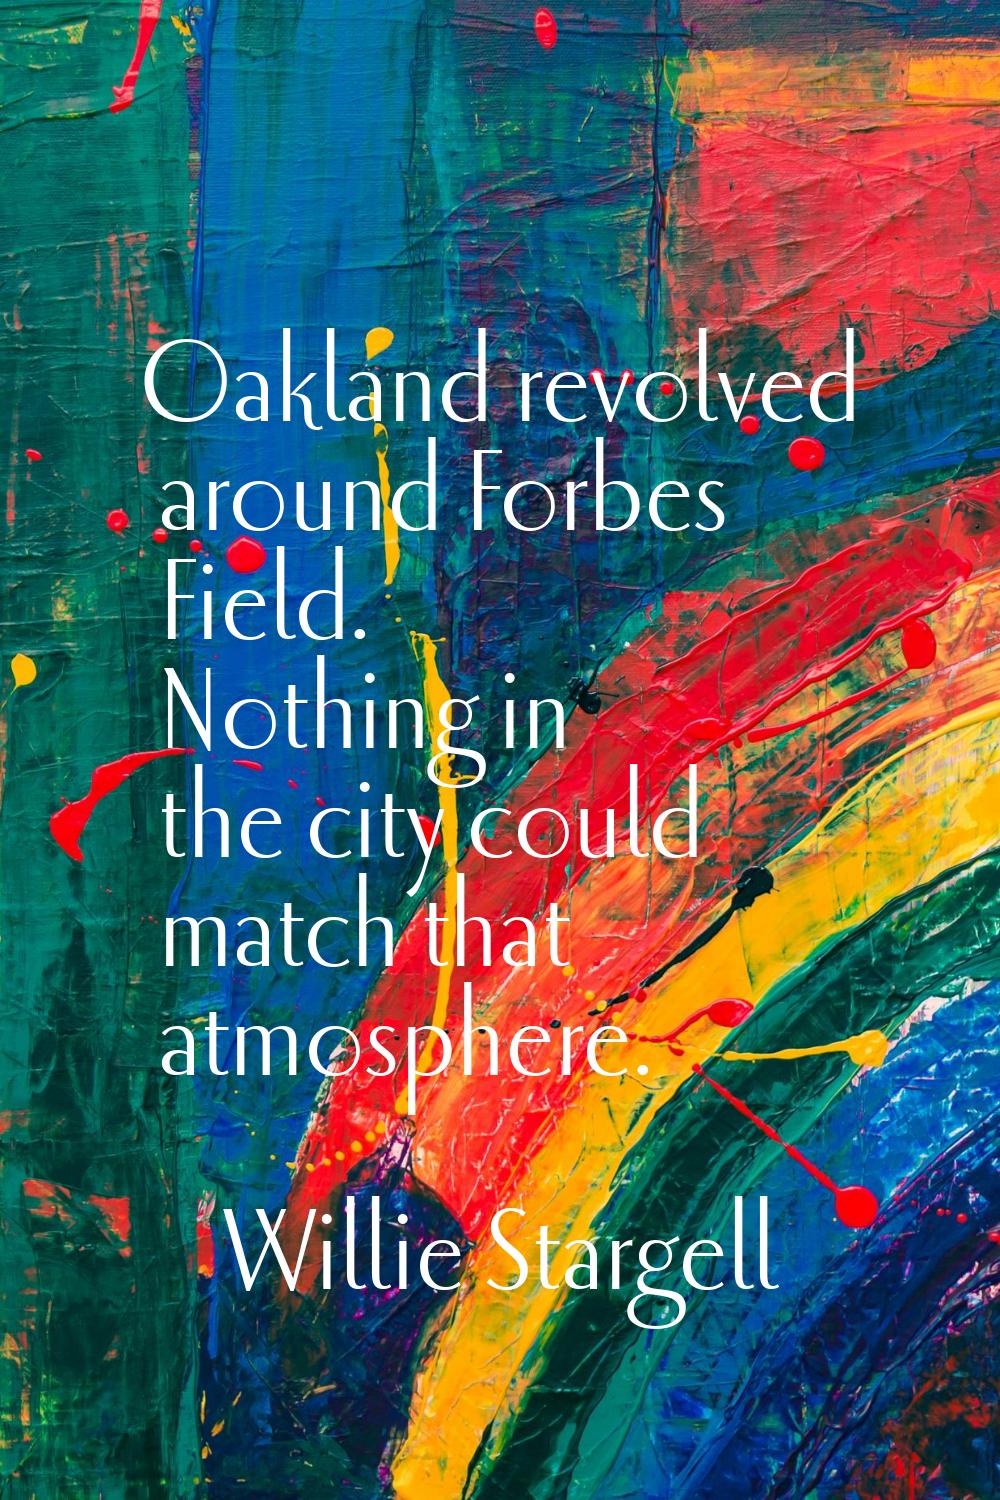 Oakland revolved around Forbes Field. Nothing in the city could match that atmosphere.